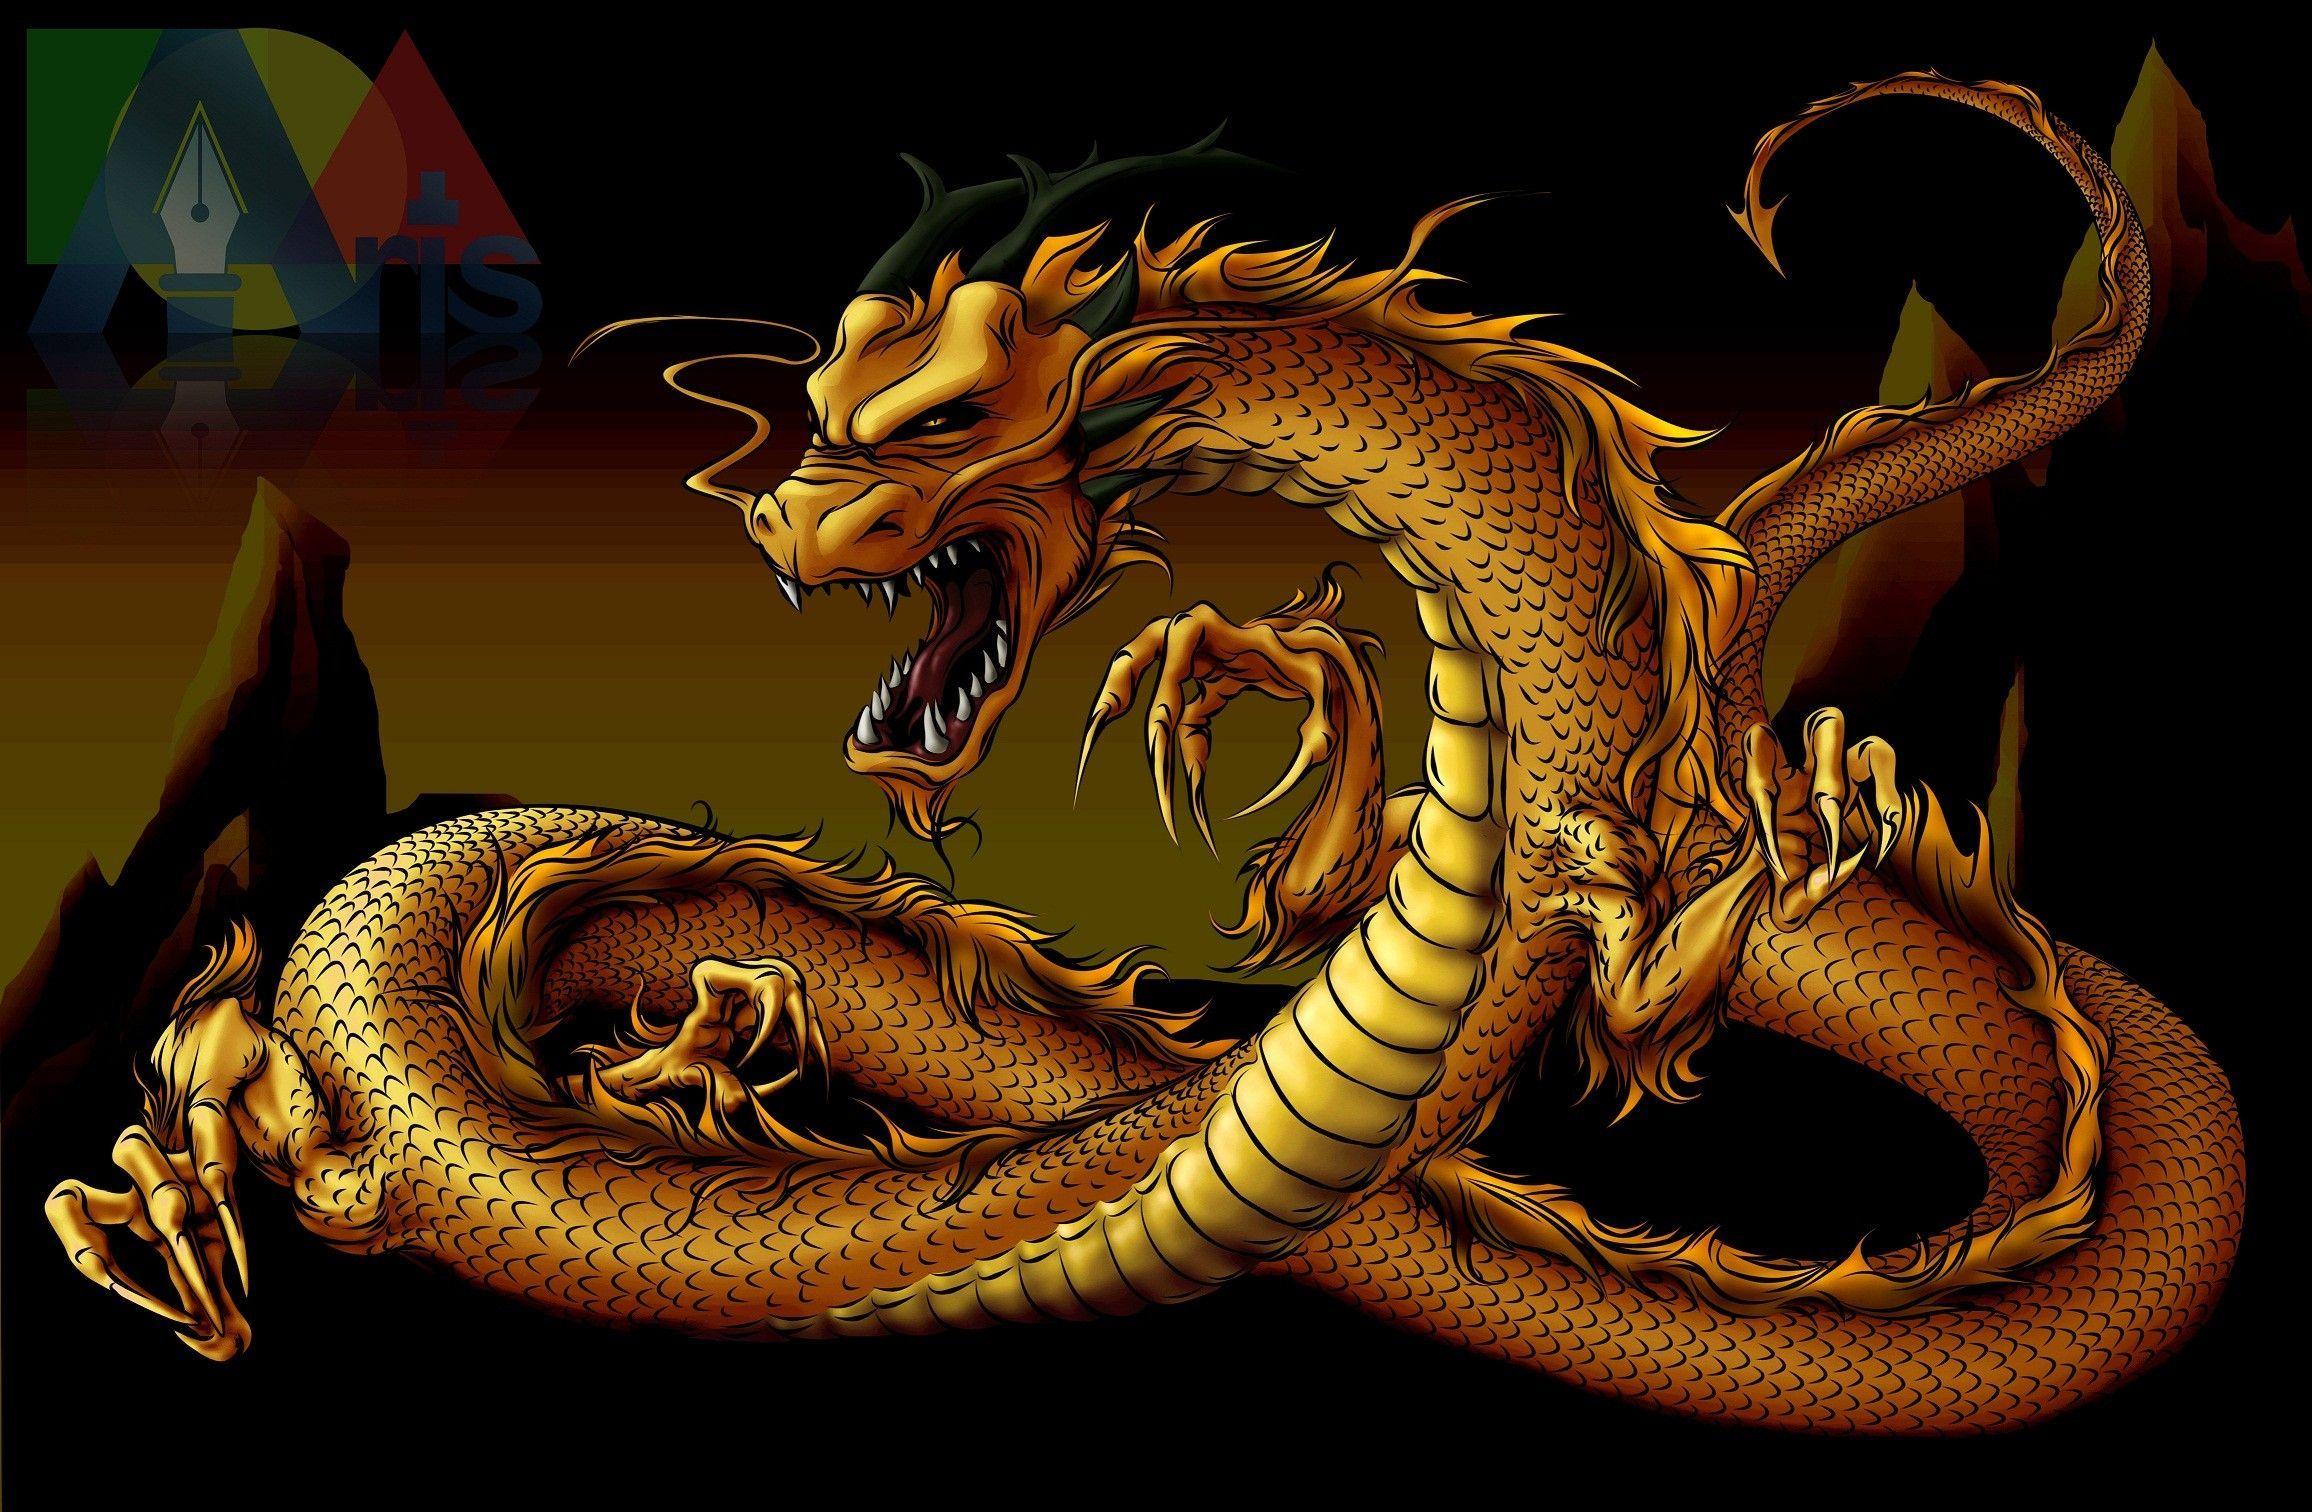 Black and Gold Dragon Wallpapers - Top Free Black and Gold Dragon ...